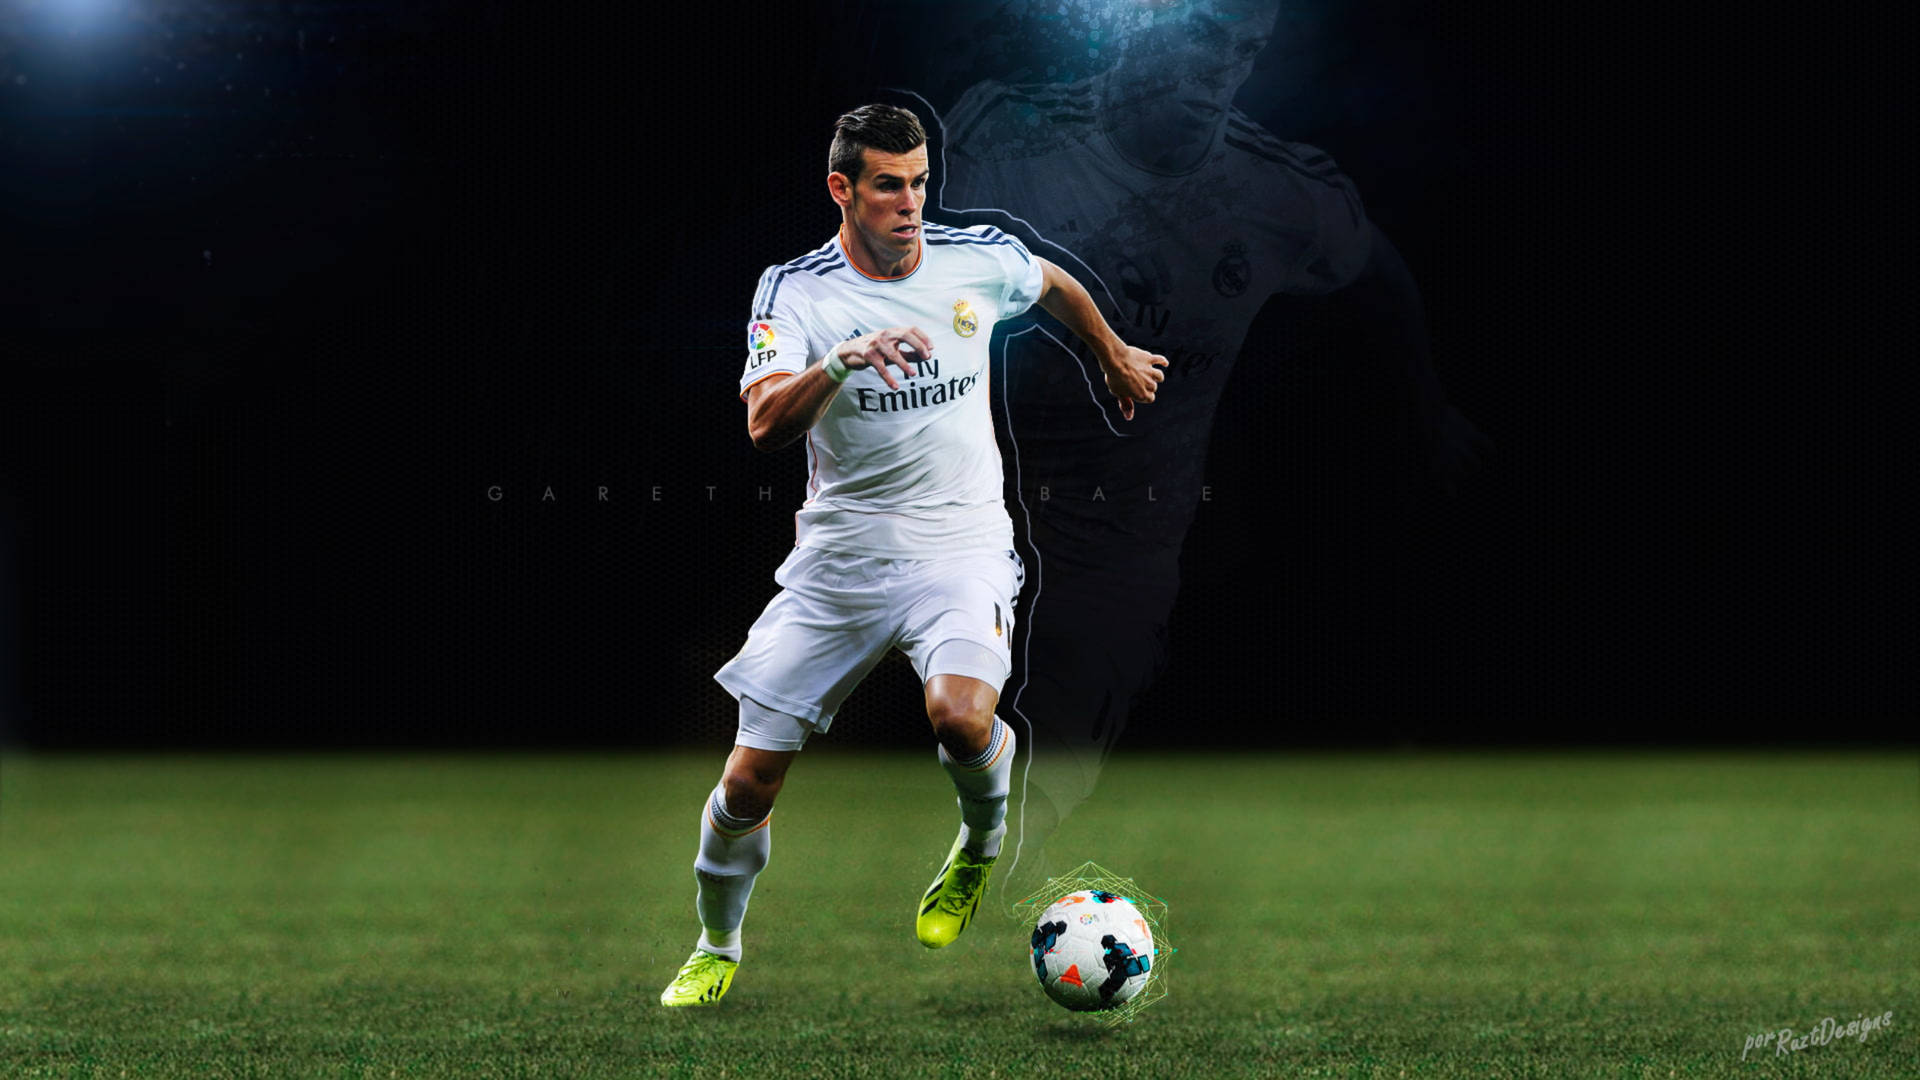 Gareth Bale With Ball In Field